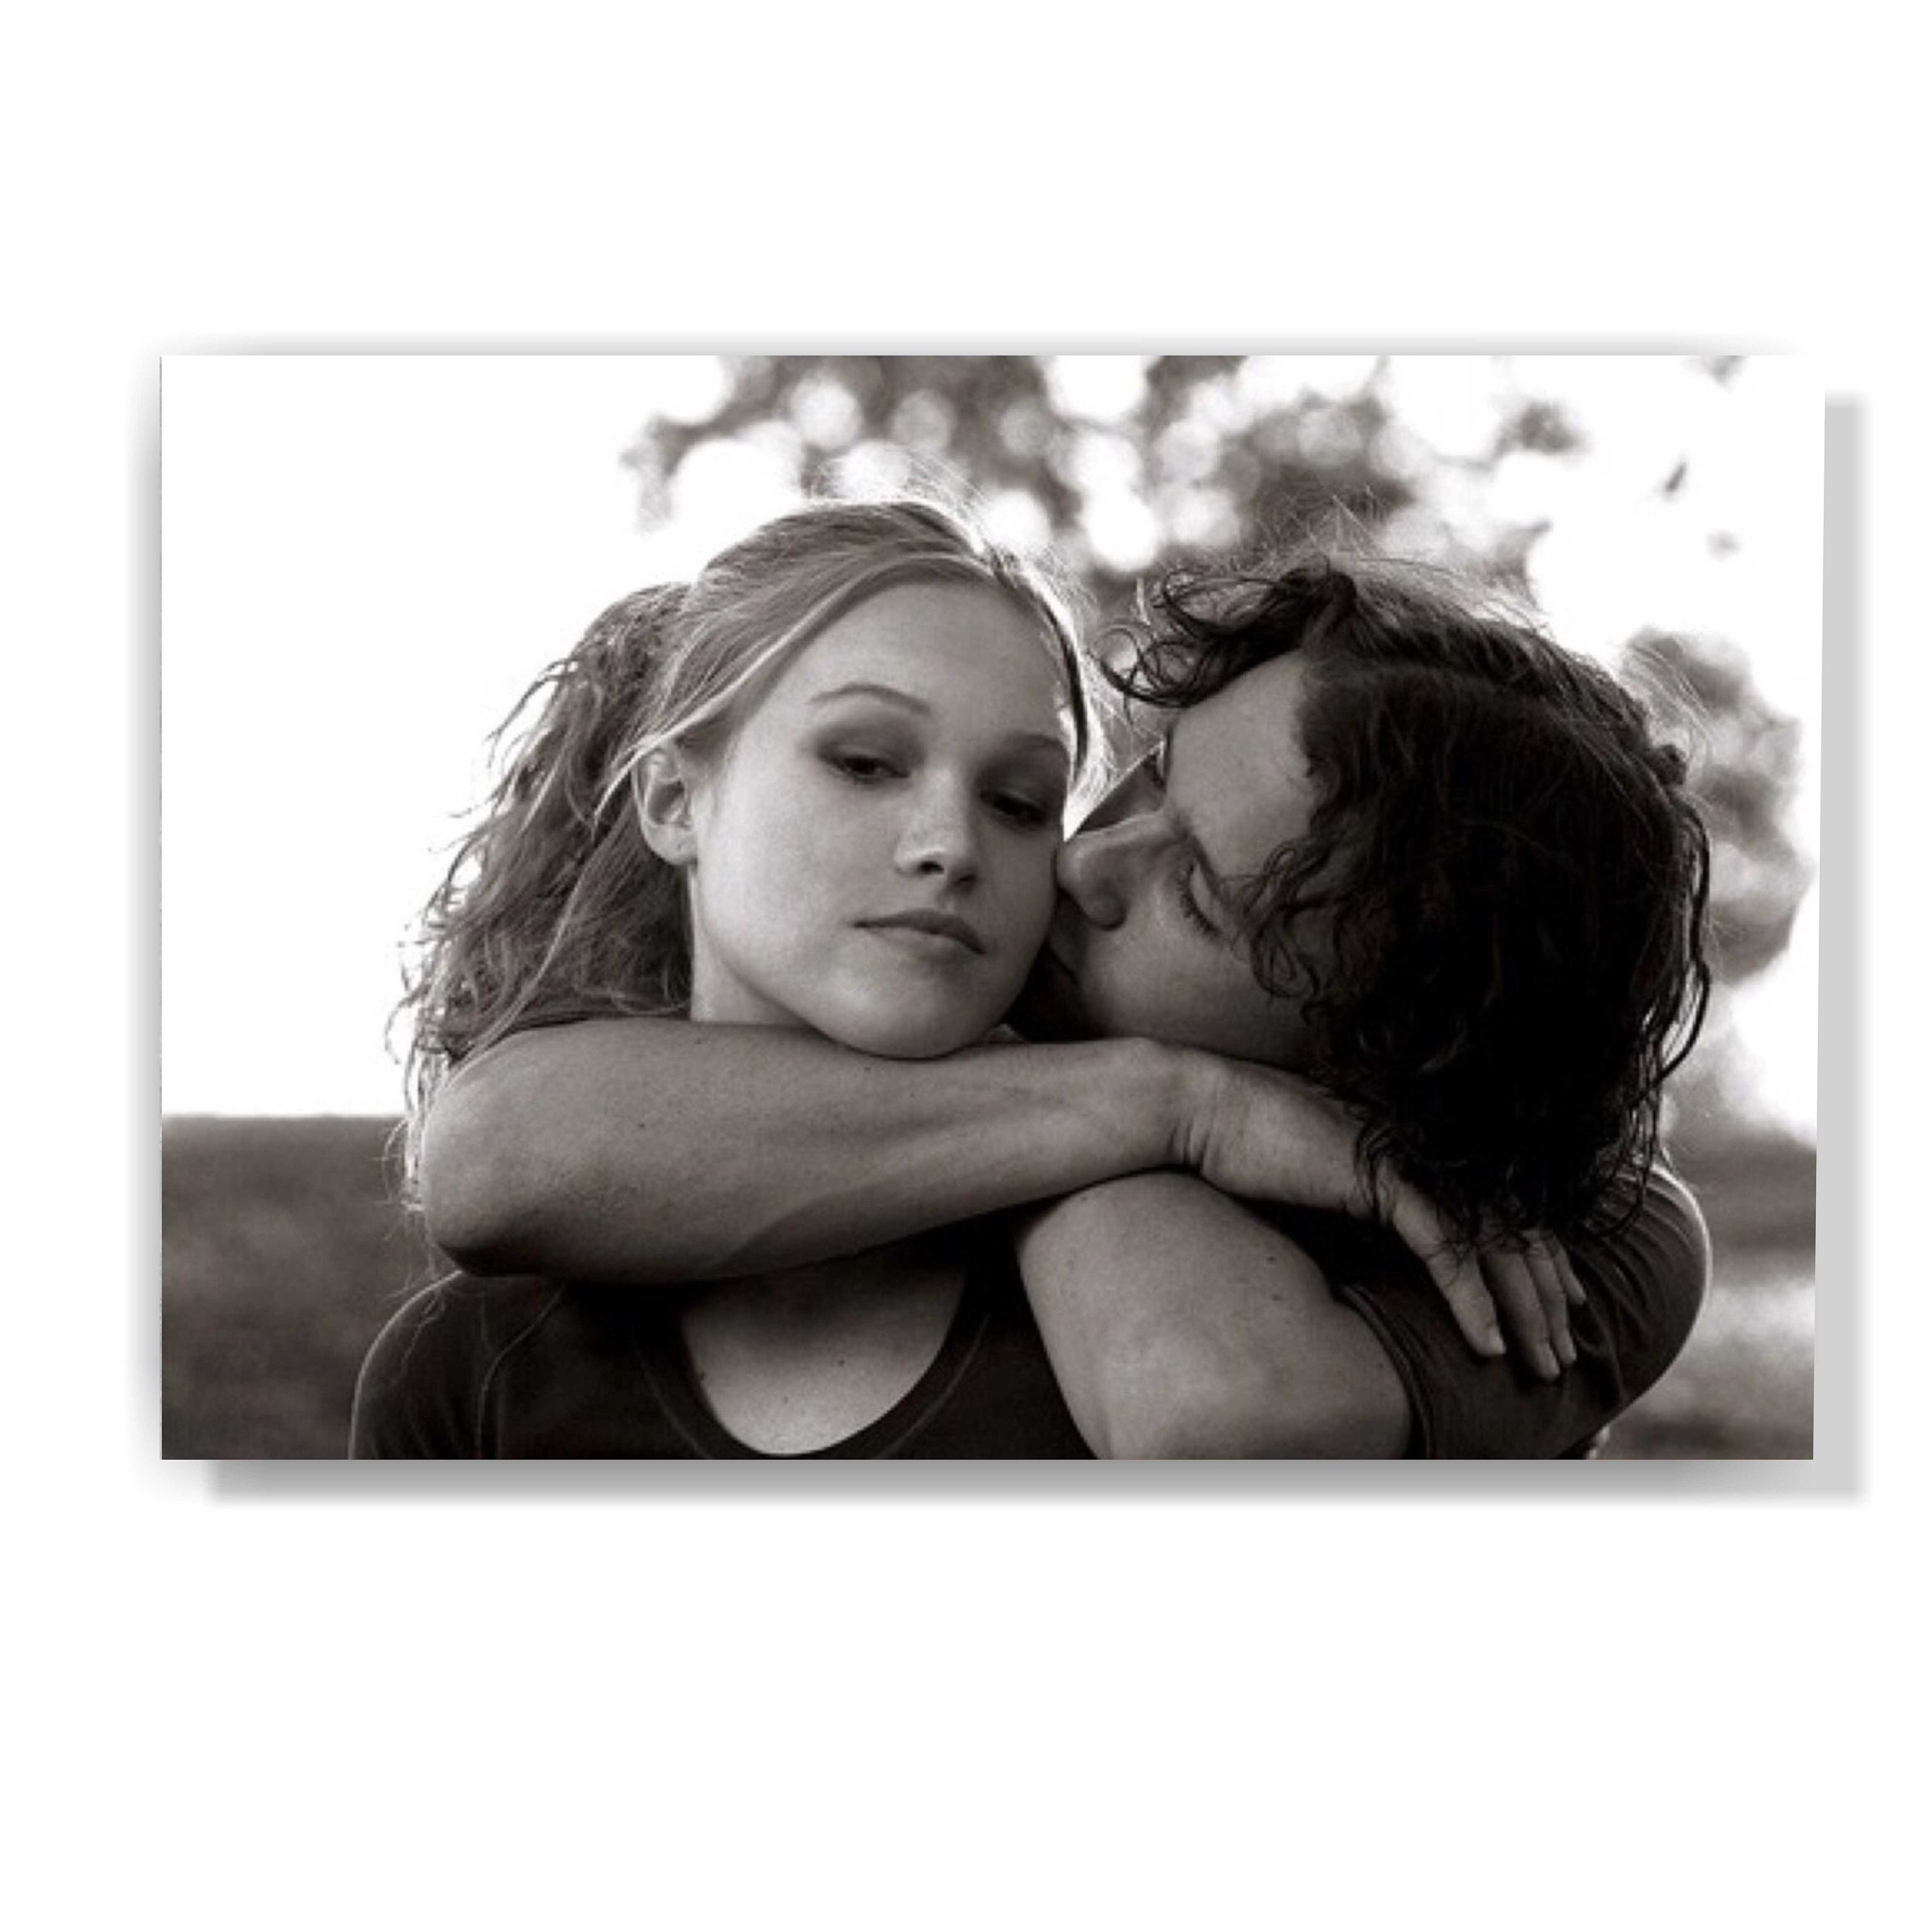 10 Things I Hate About You Poster Canvas Poster Unframe: 12x18inch(30x45cm)